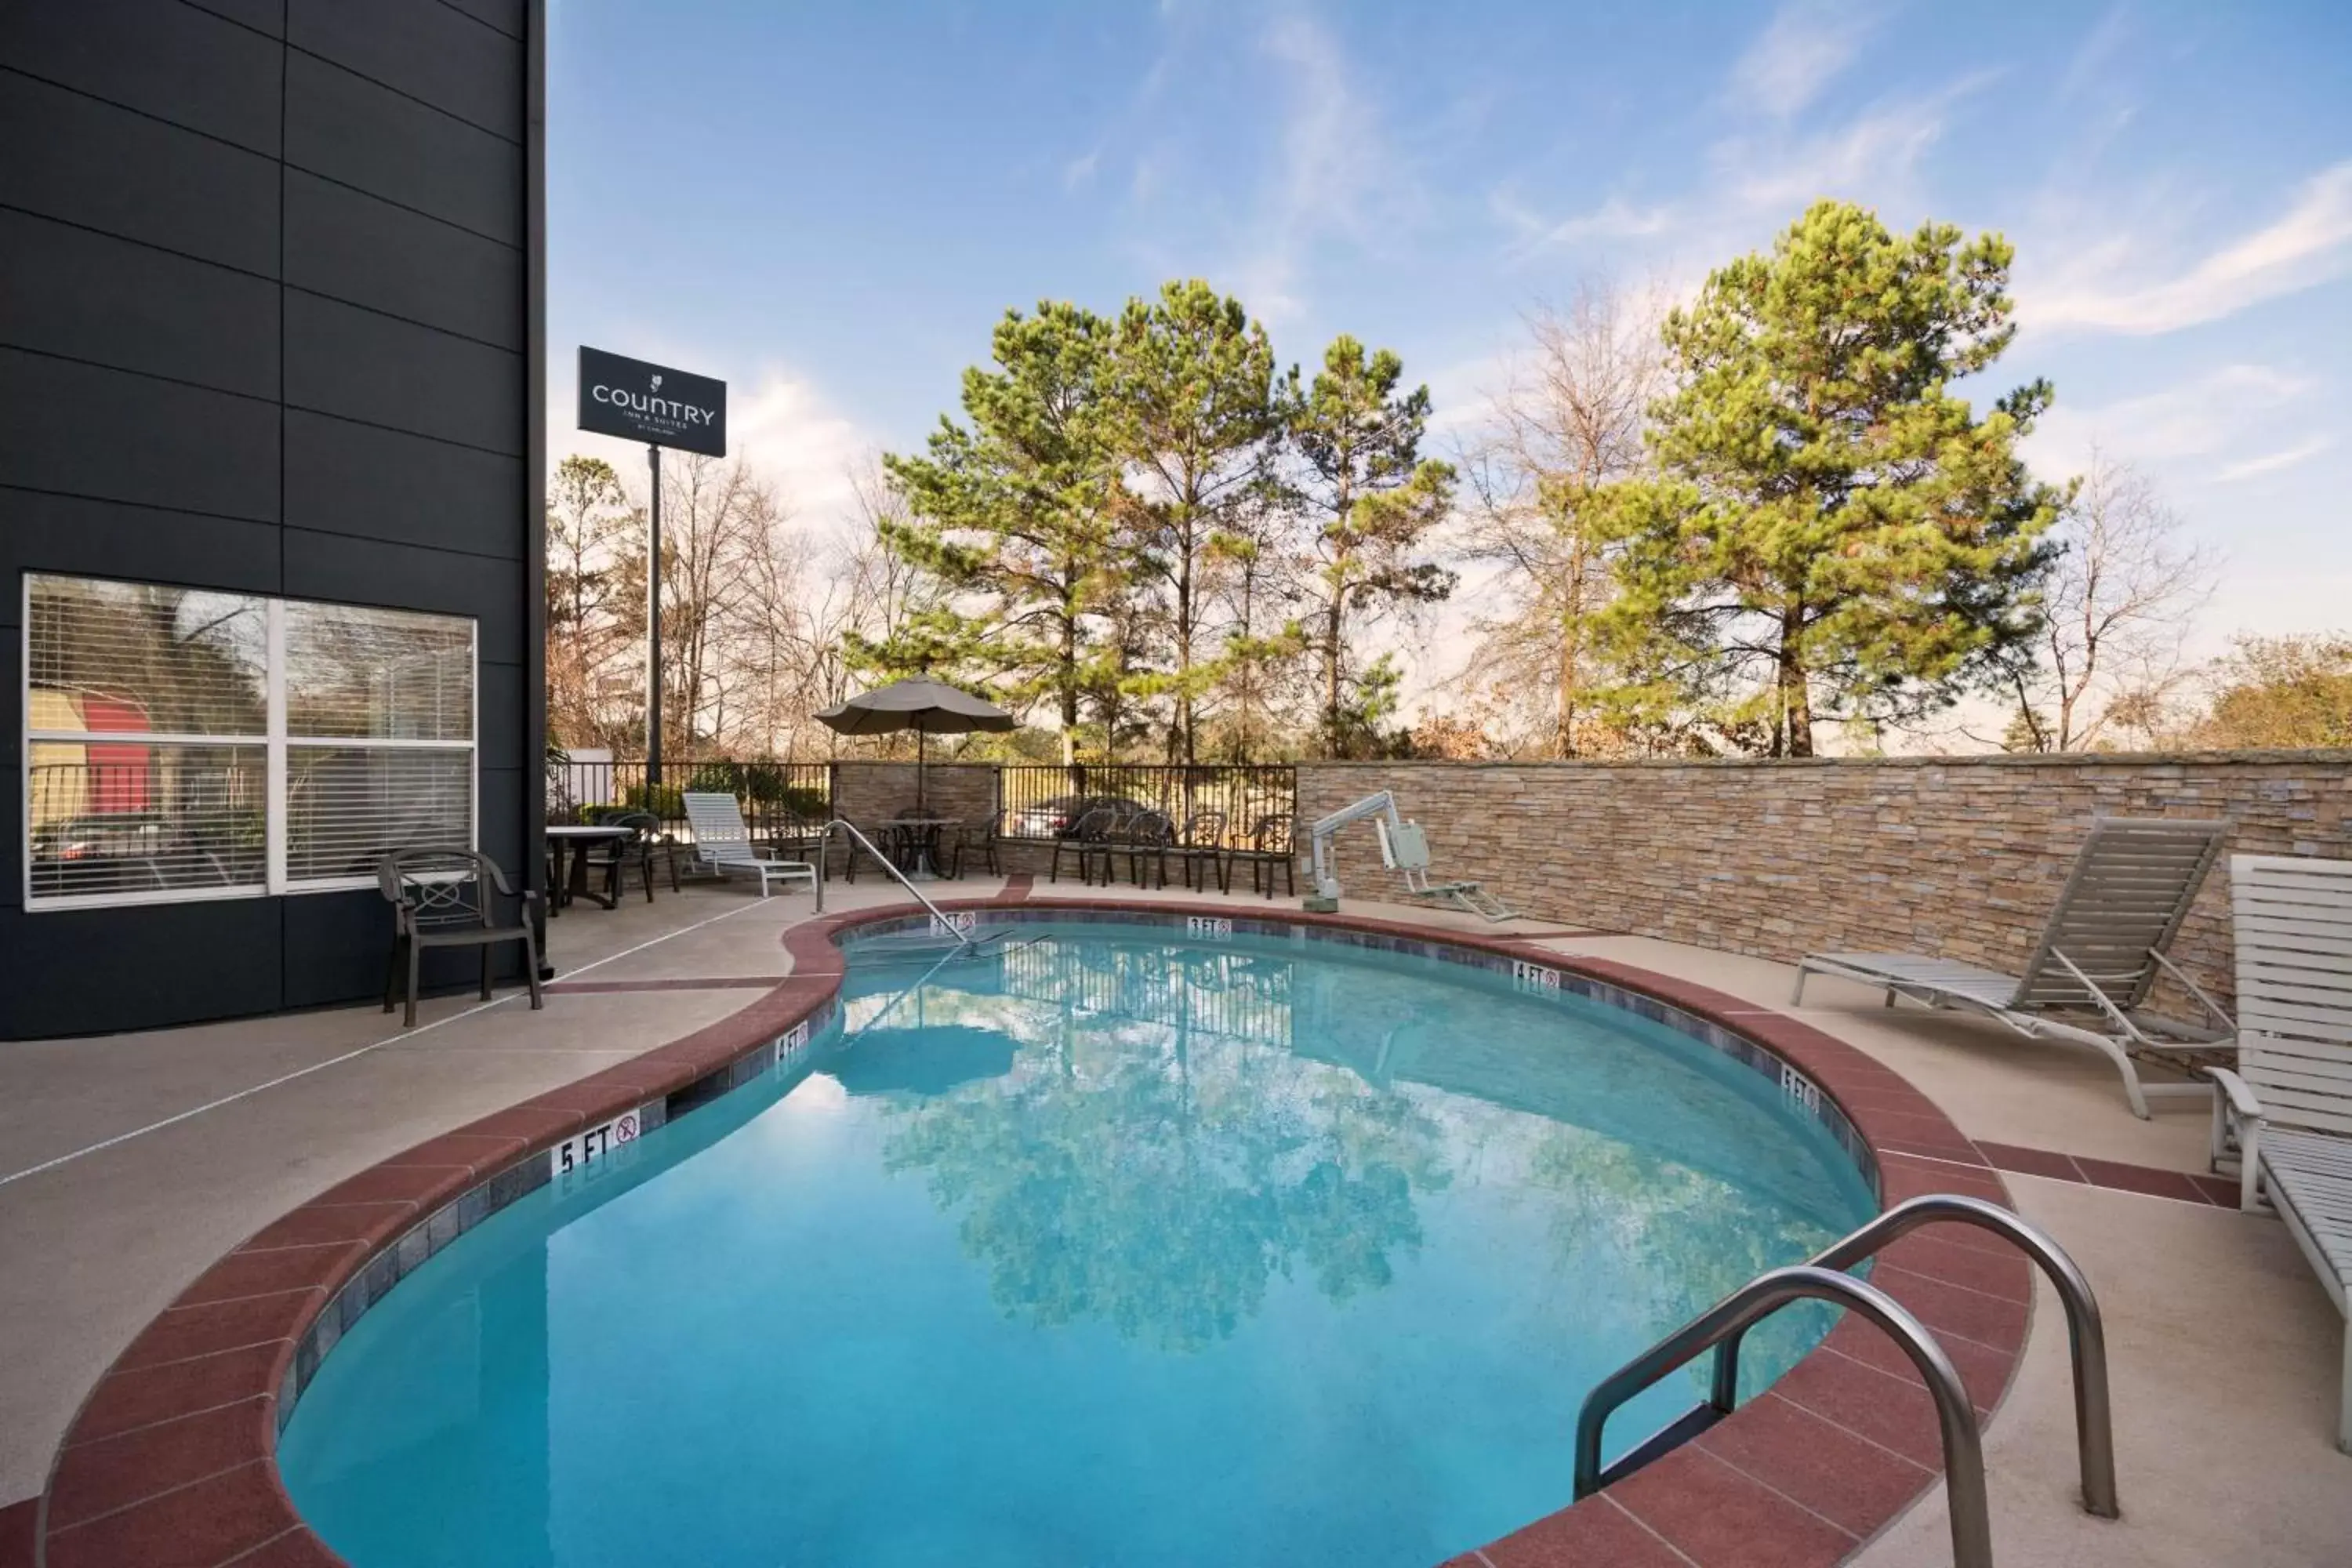 Activities, Swimming Pool in Country Inn & Suites by Radisson, Atlanta I-75 South, GA